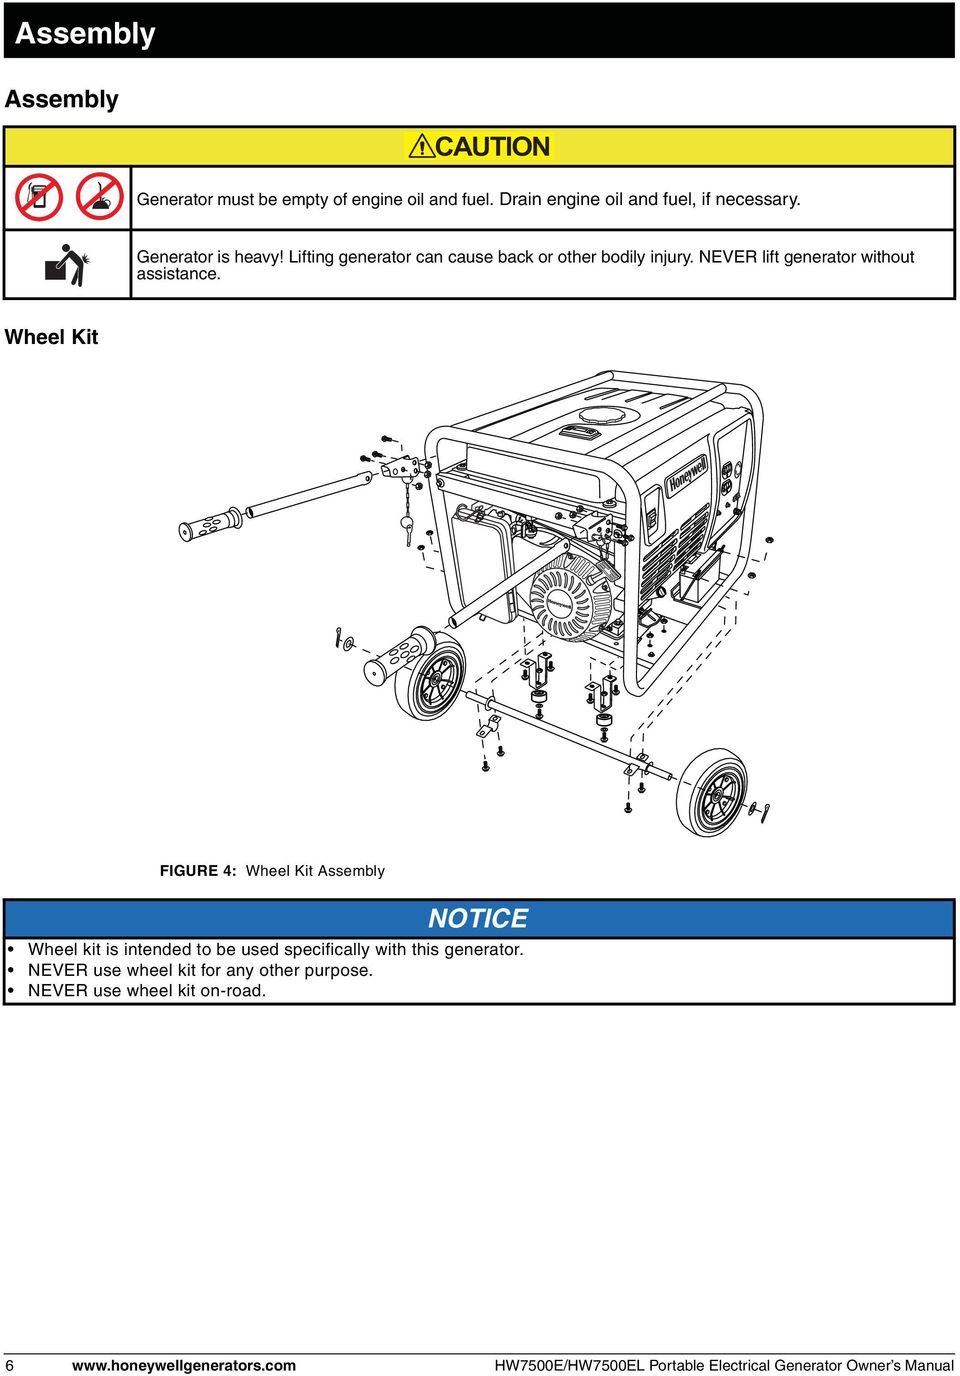 Wheel Kit FIGURE 4: Wheel Kit Assembly NOTICE Wheel kit is intended to be used specifically with this generator.